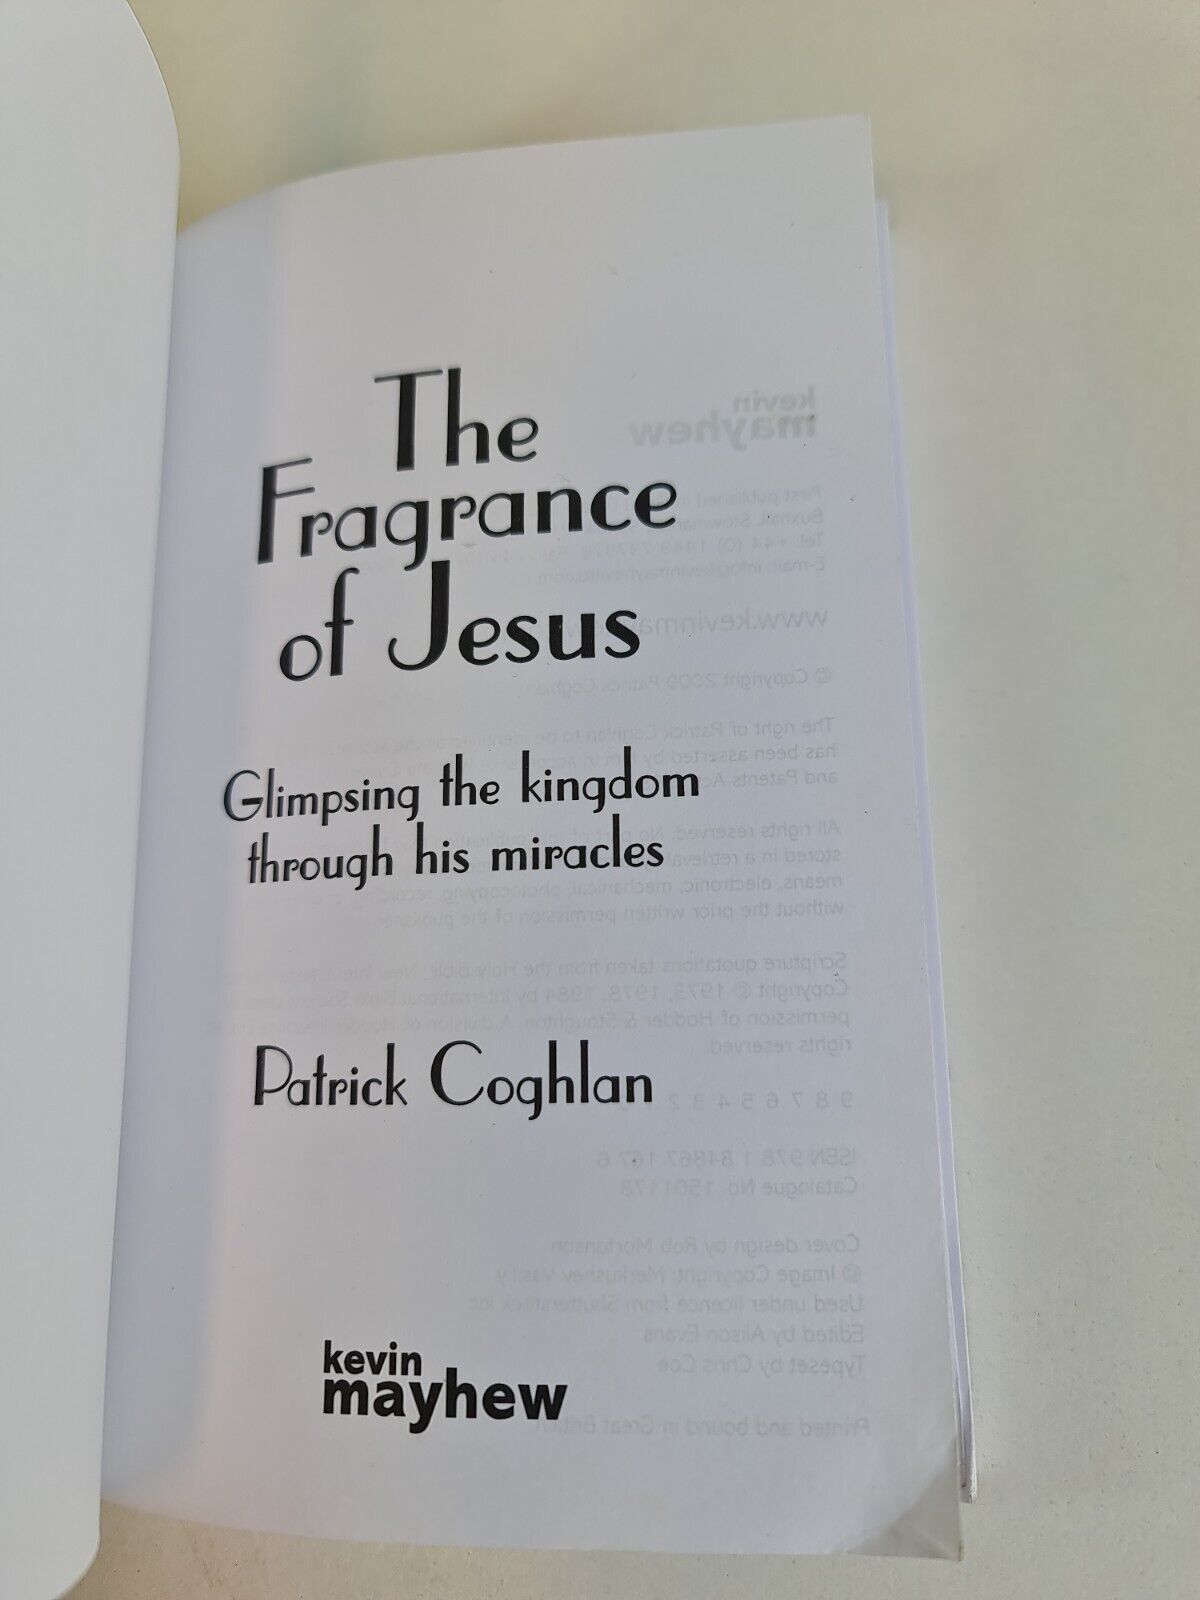 The Fragrance of Jesus: Glimpsing the Kingdom Through His Miracles by Coghlan